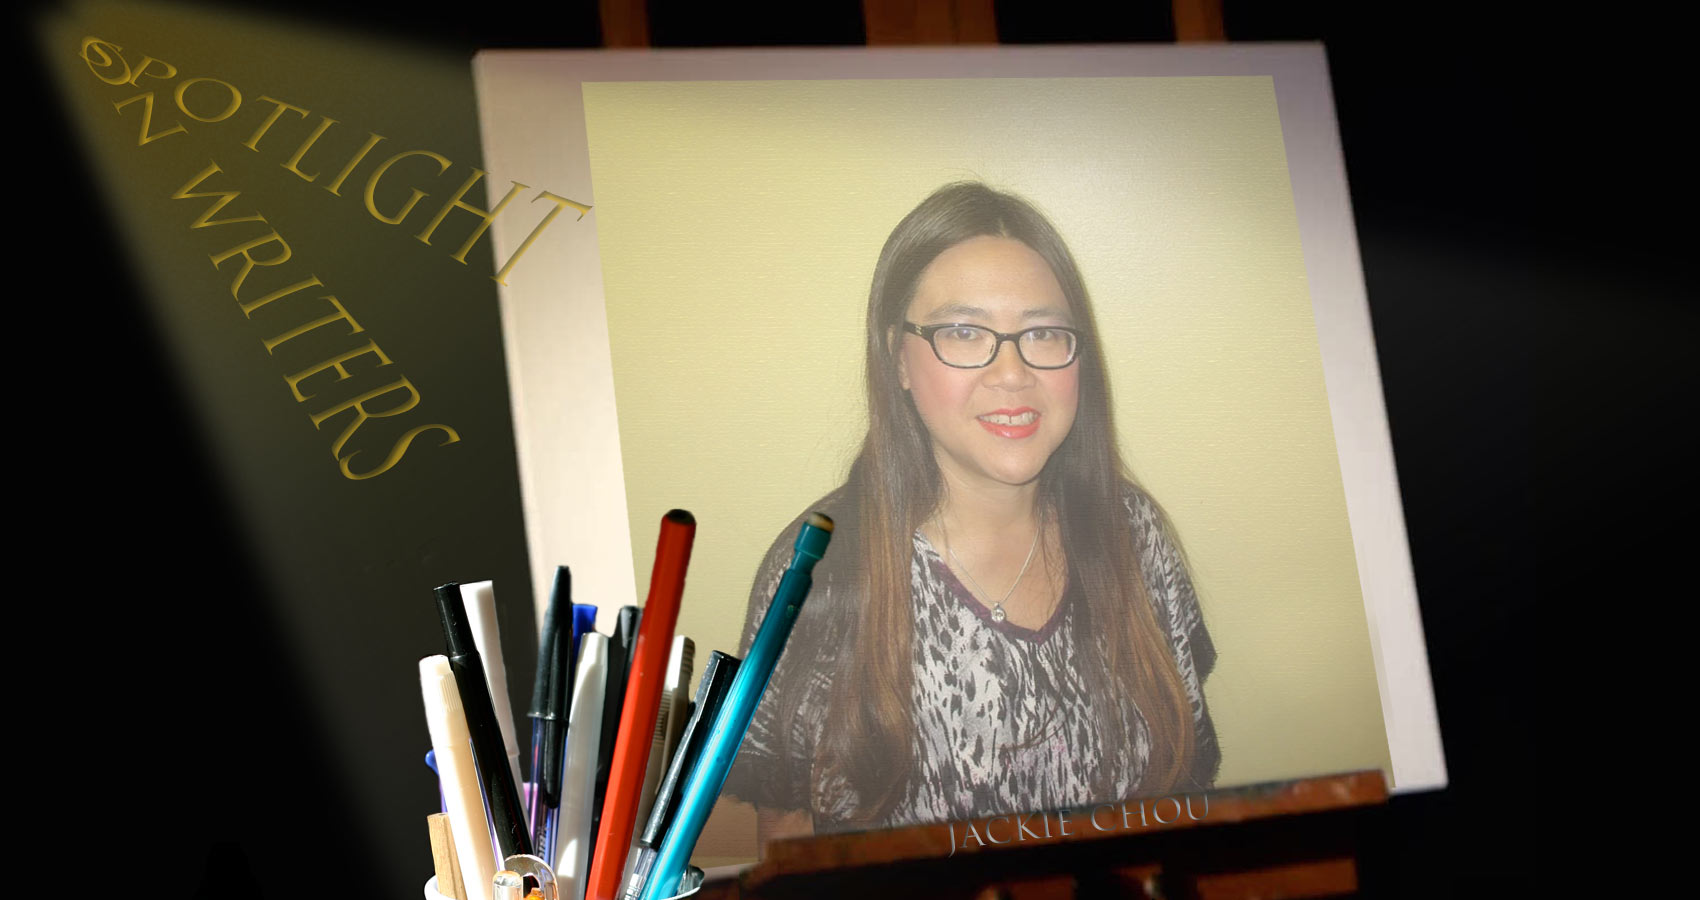 Spotlight On Writers - Jackie Chou, interview at Spillwords.com